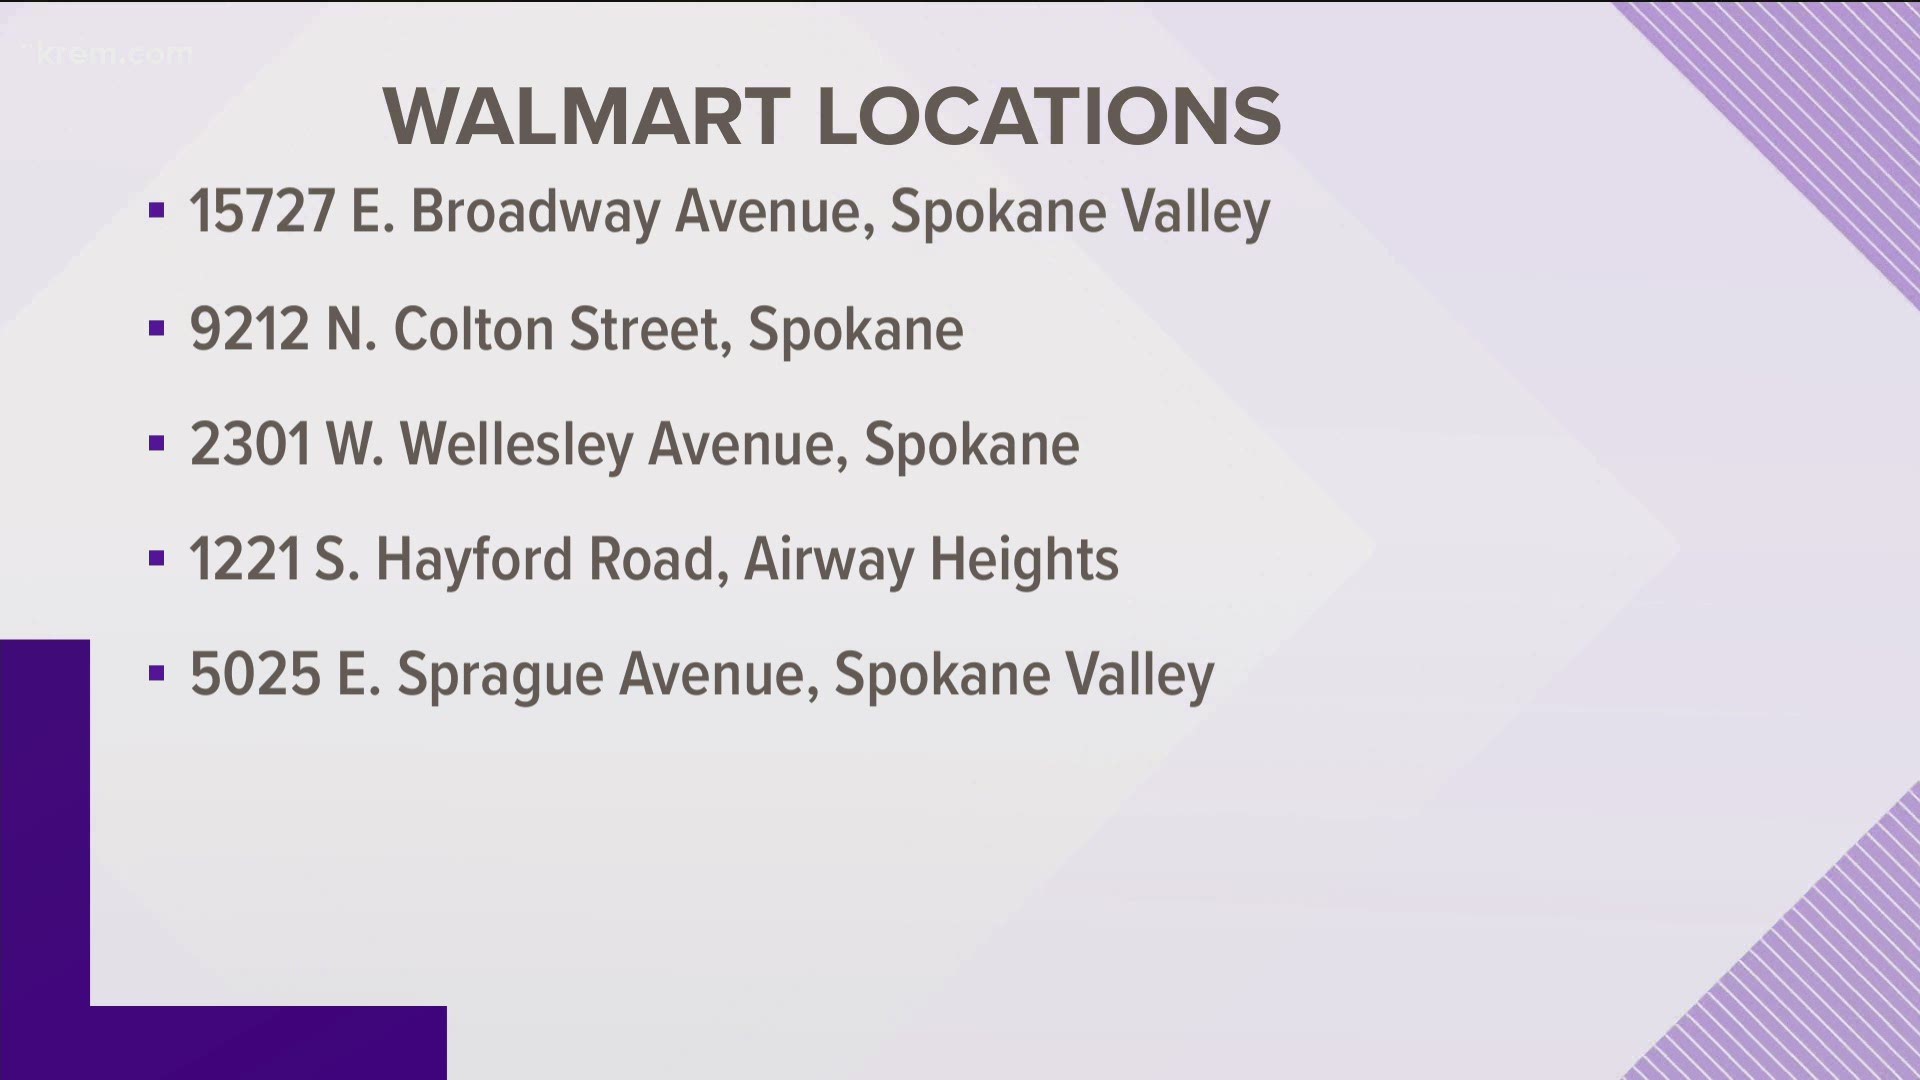 Pharmacies at Walmart, Safeway, Yoke's, Costco and Fred Meyer stores in Spokane County are offering COVID-19 vaccines. Here's how to schedule an appointment.